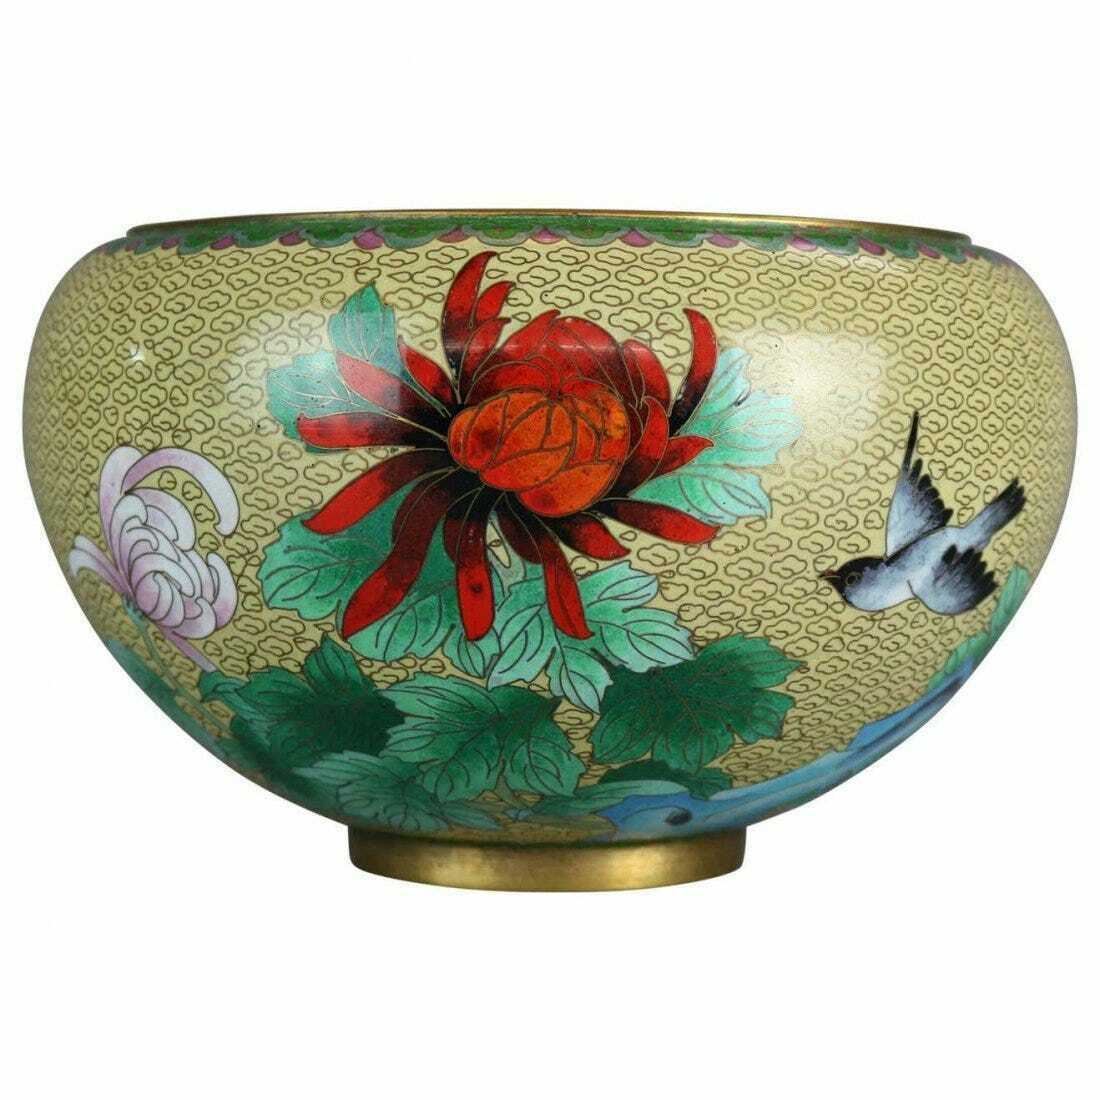 ANTIQUE CHINESE FLORAL & BIRD DECORATED CLOISONNE ENAMELED BOWL